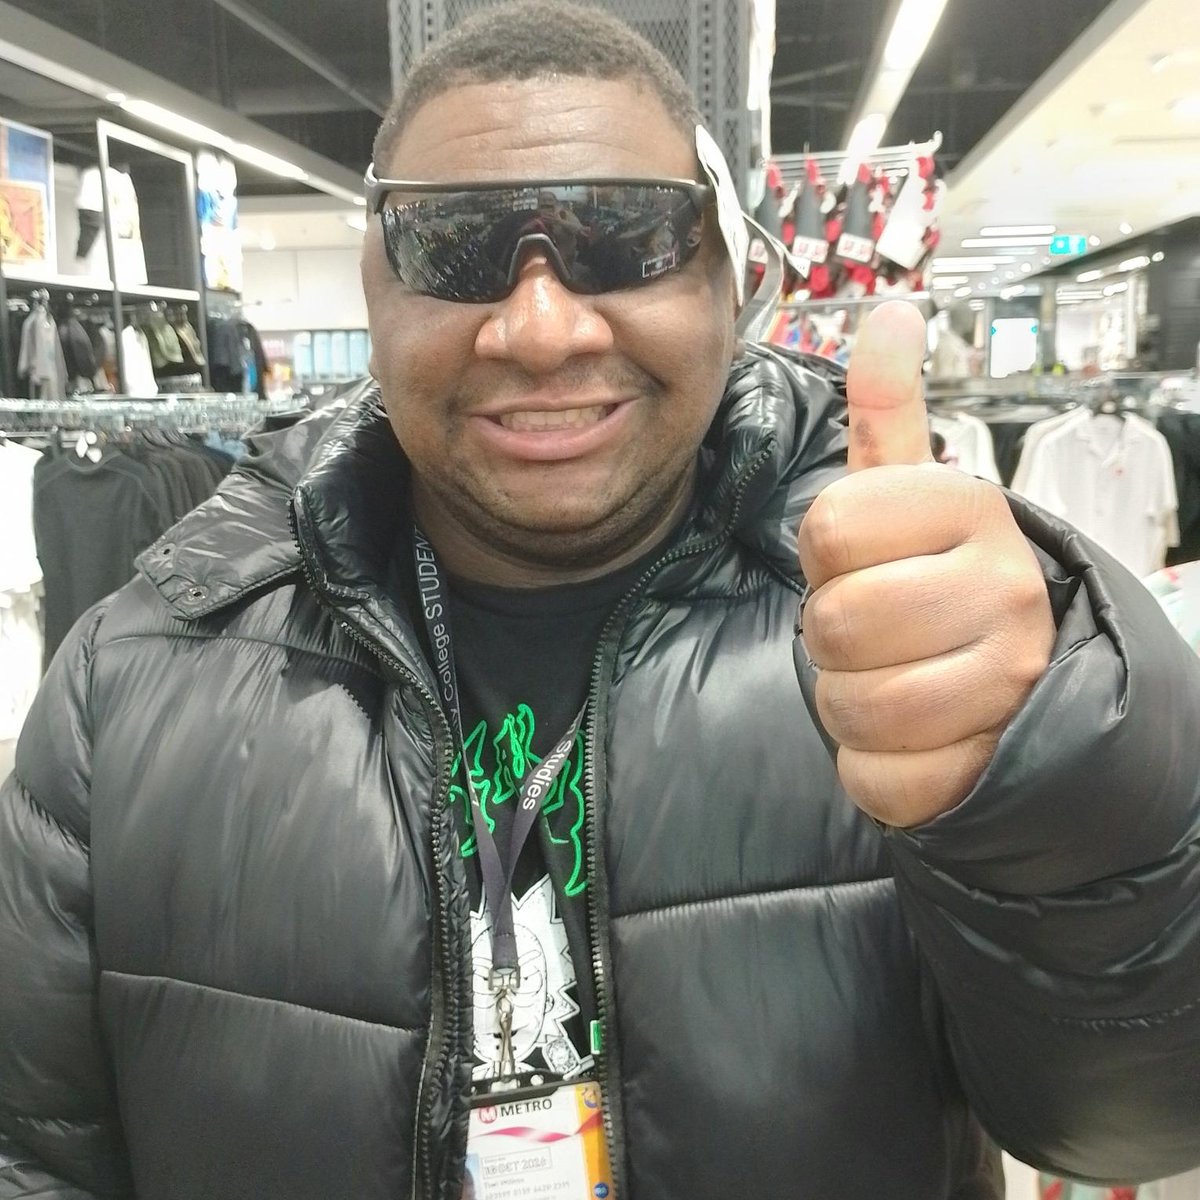 Tieri had loads of fun trying on hats and sunglasses in preparation for summer, and told Jessica he looks 'gangsta' with the sidewards baseball cap on 🤣 Which look do you think he should go for? #autism #inclusion #Leeds